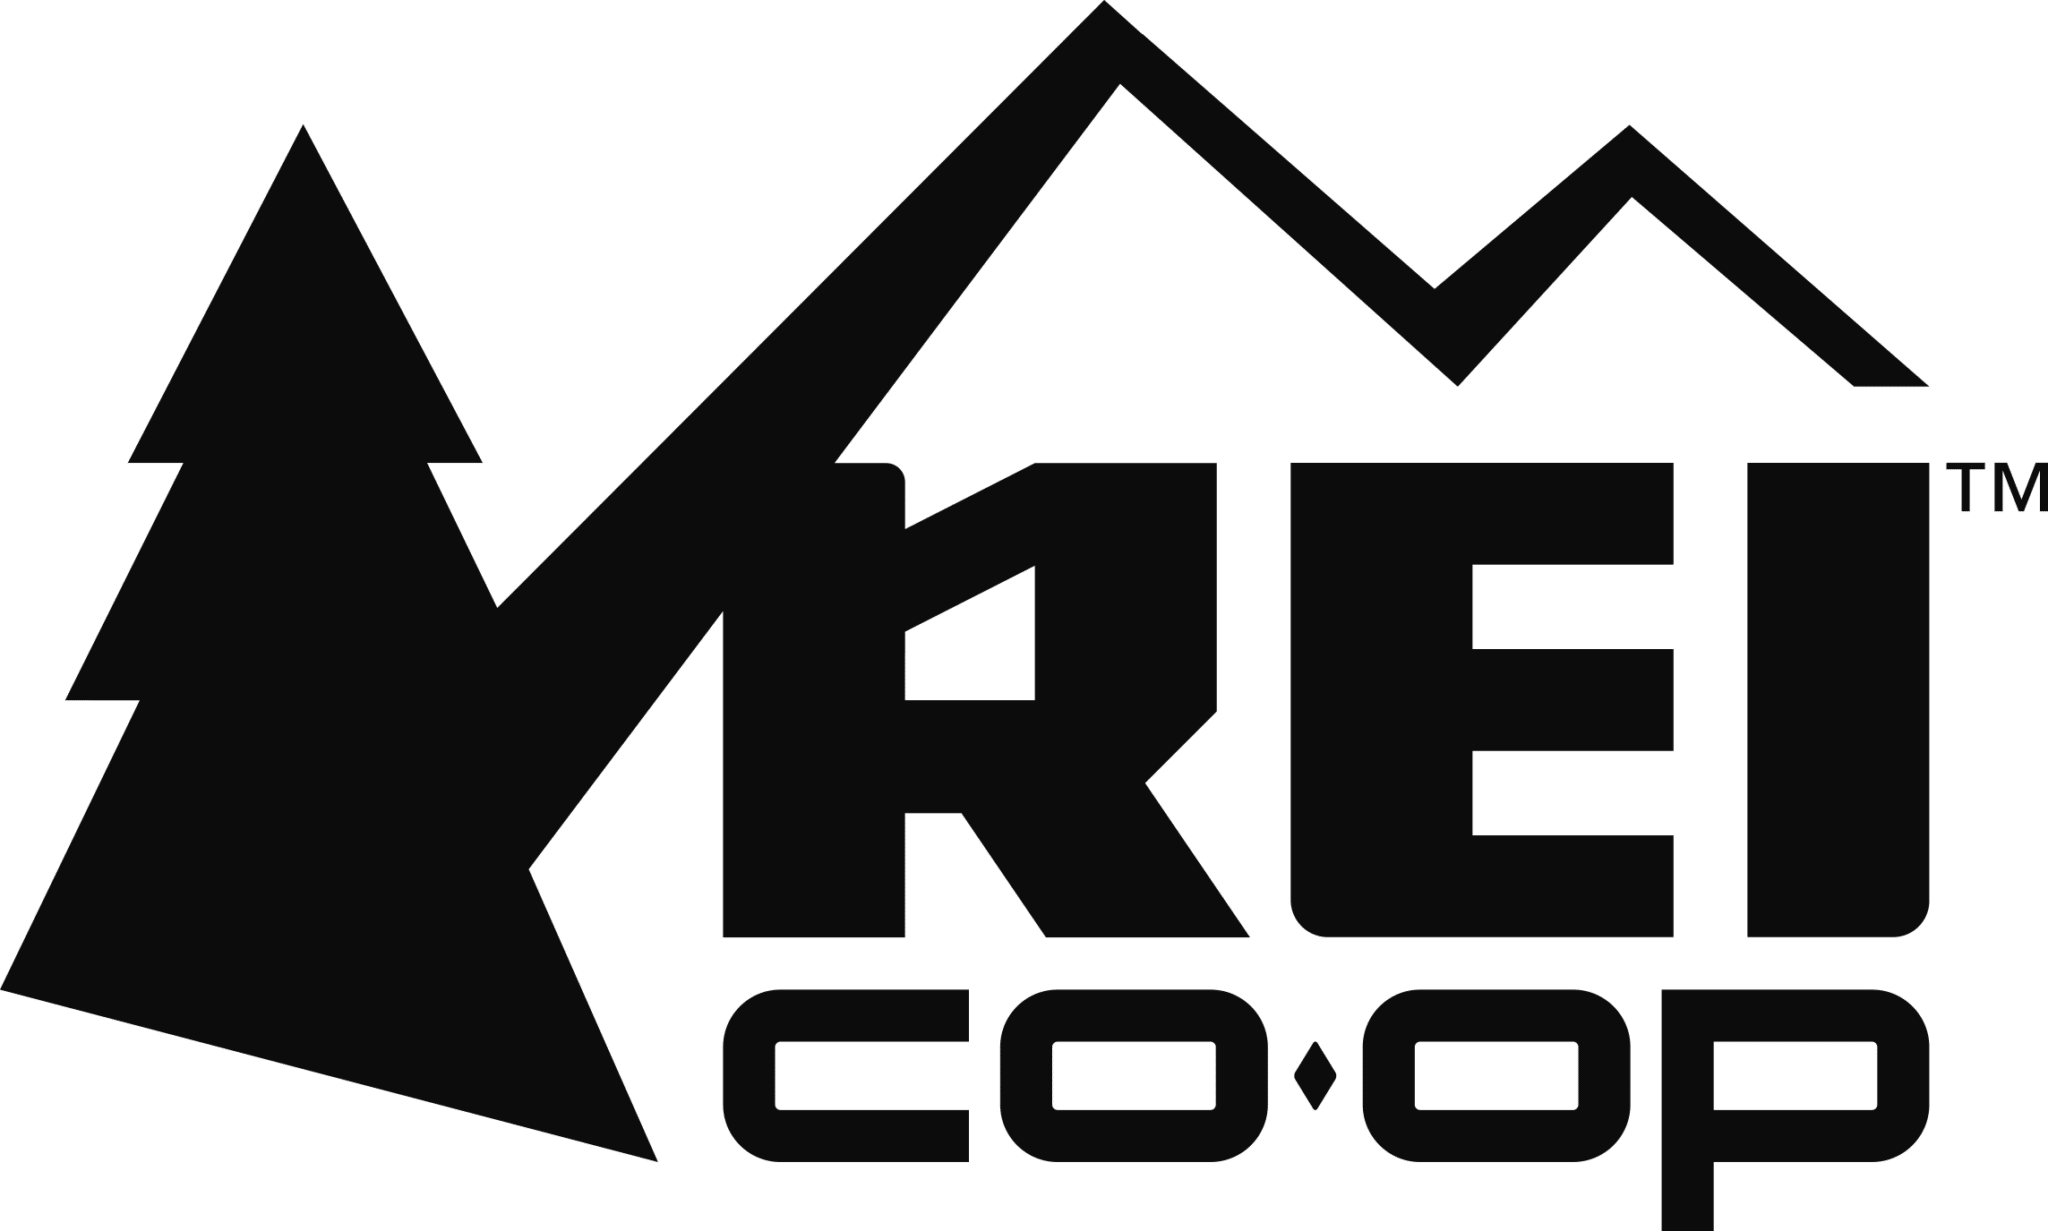 REI Co-op logo with a pine tree and mountain imagery